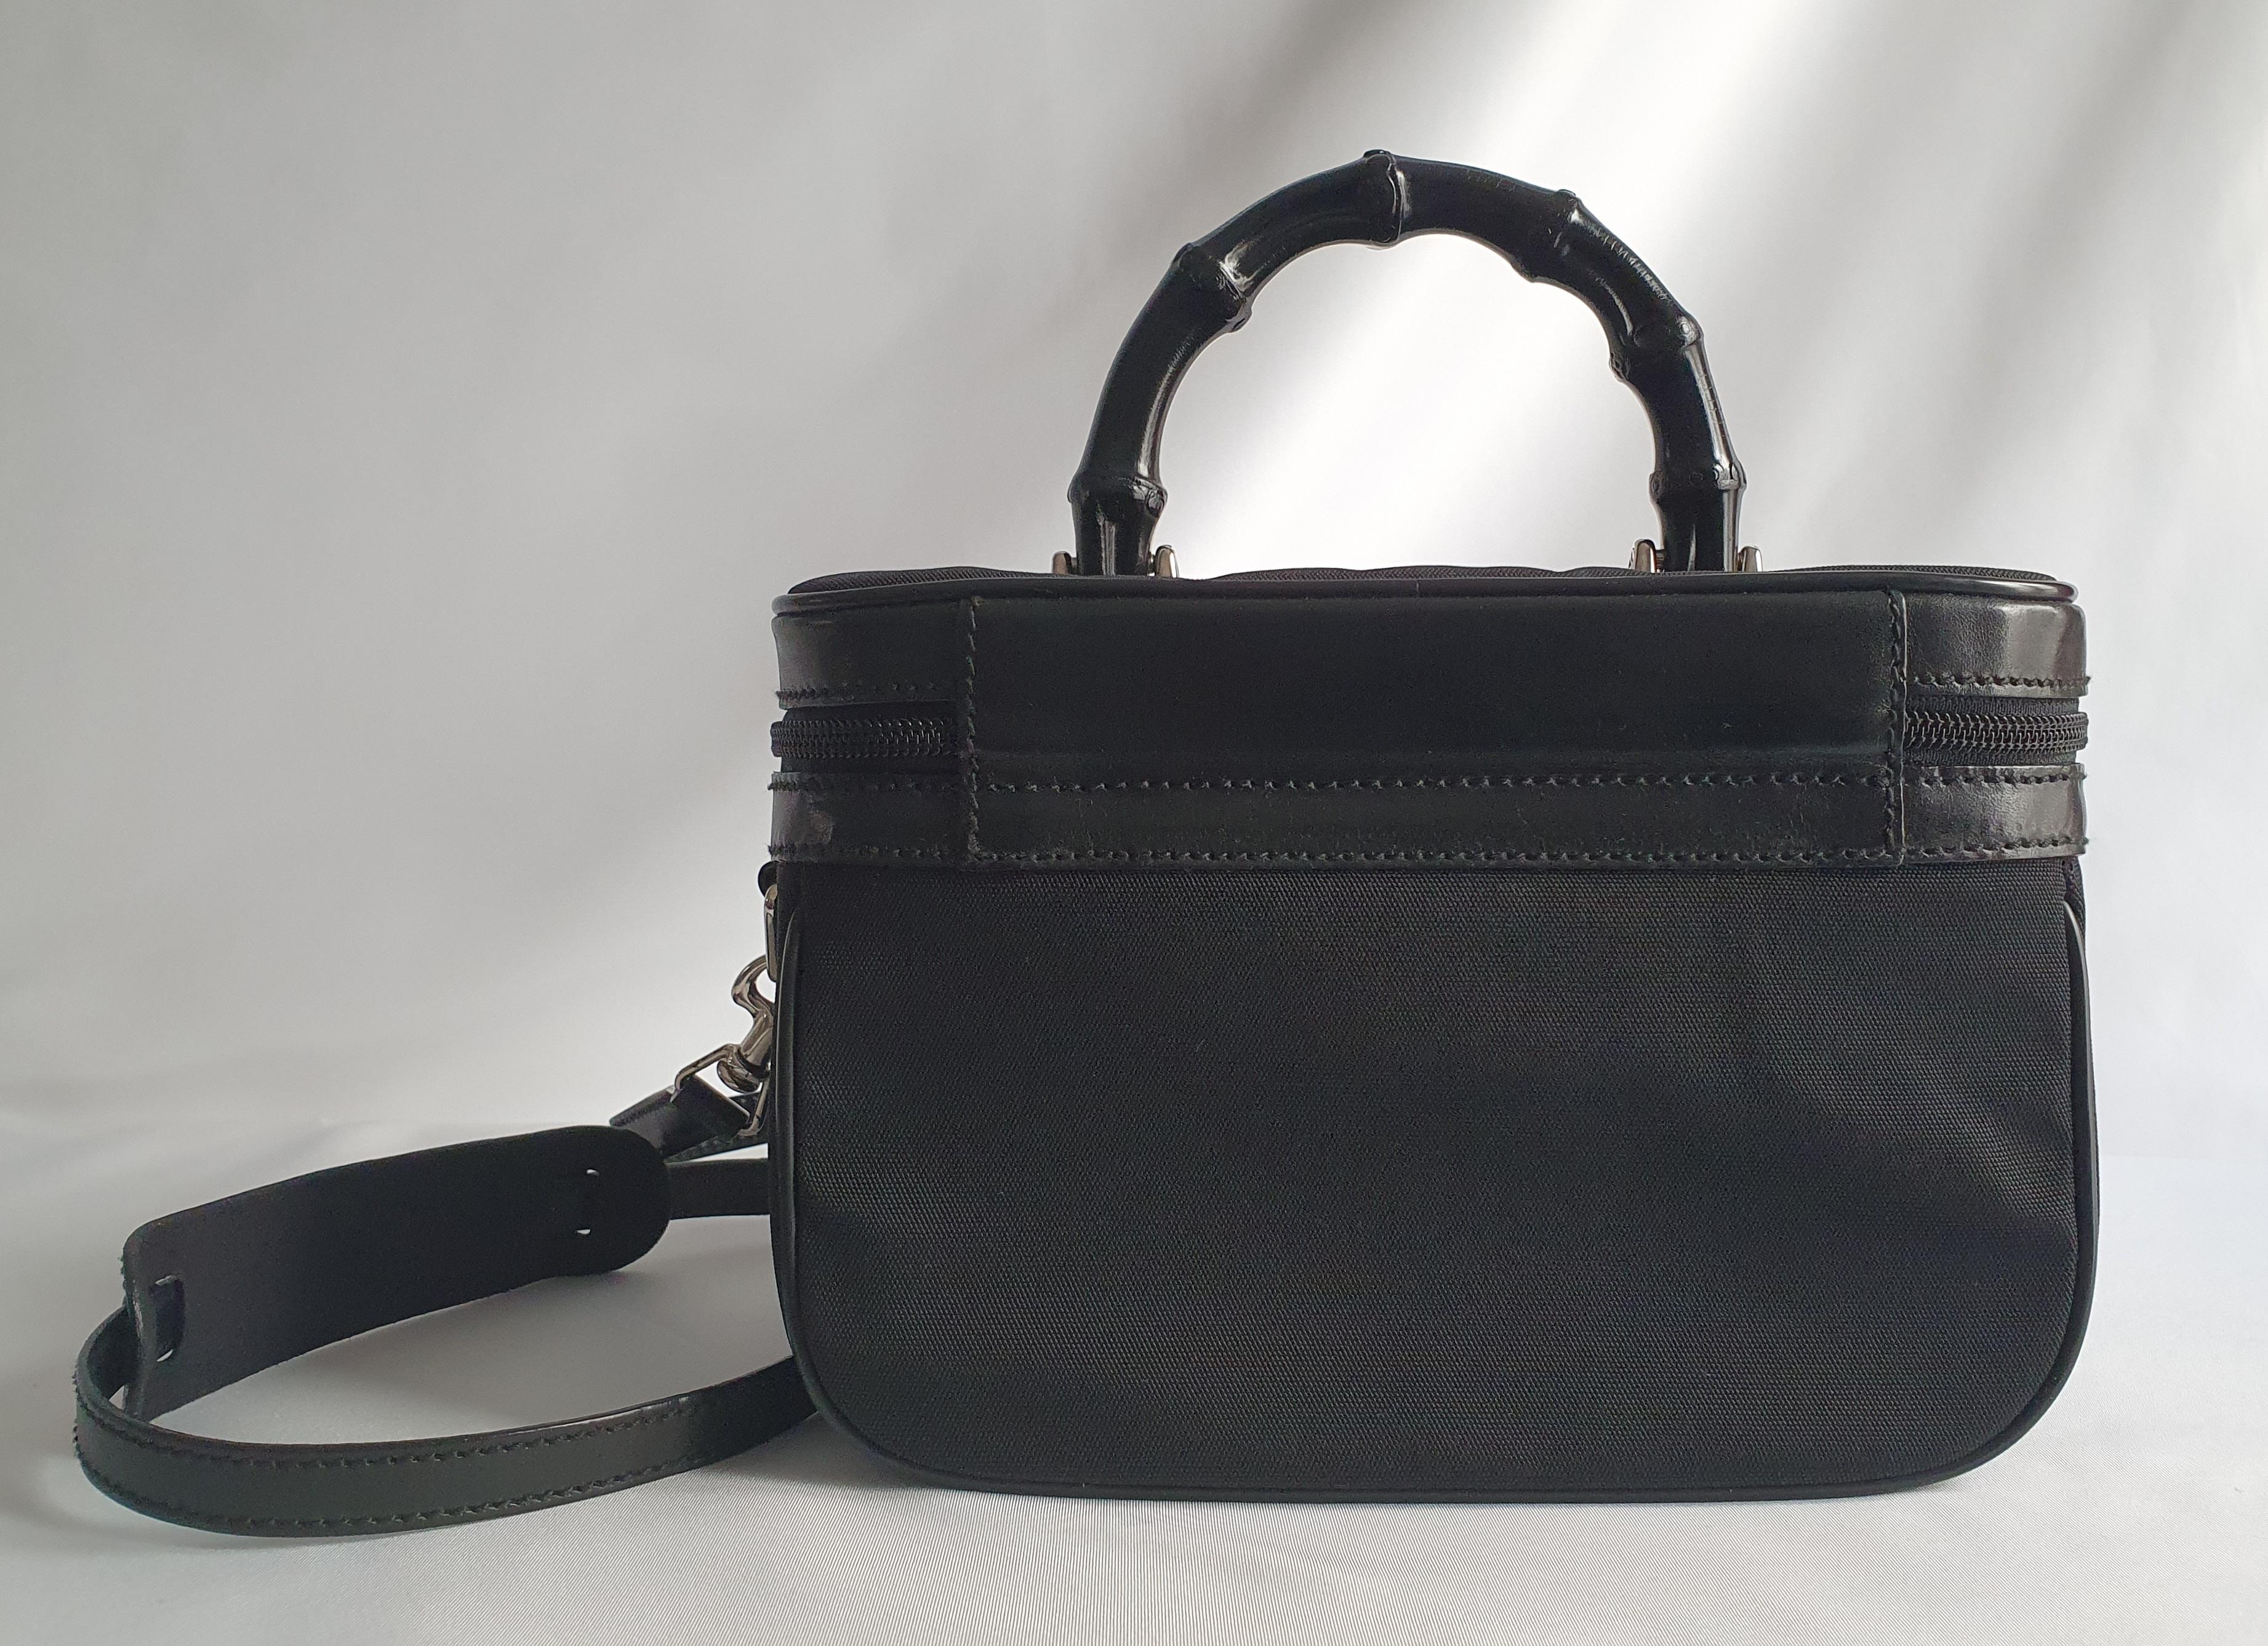 - Designer: GUCCI
- Model: Bamboo
- Condition: Very good condition. Scratches on the clasp, Bag restored by a professional
- Accessories: None
- Measurements: Width: 24cm, Height: 16cm, Depth: 13cm, Strap: 121cm
- Exterior Material: Cloth
- Exterior